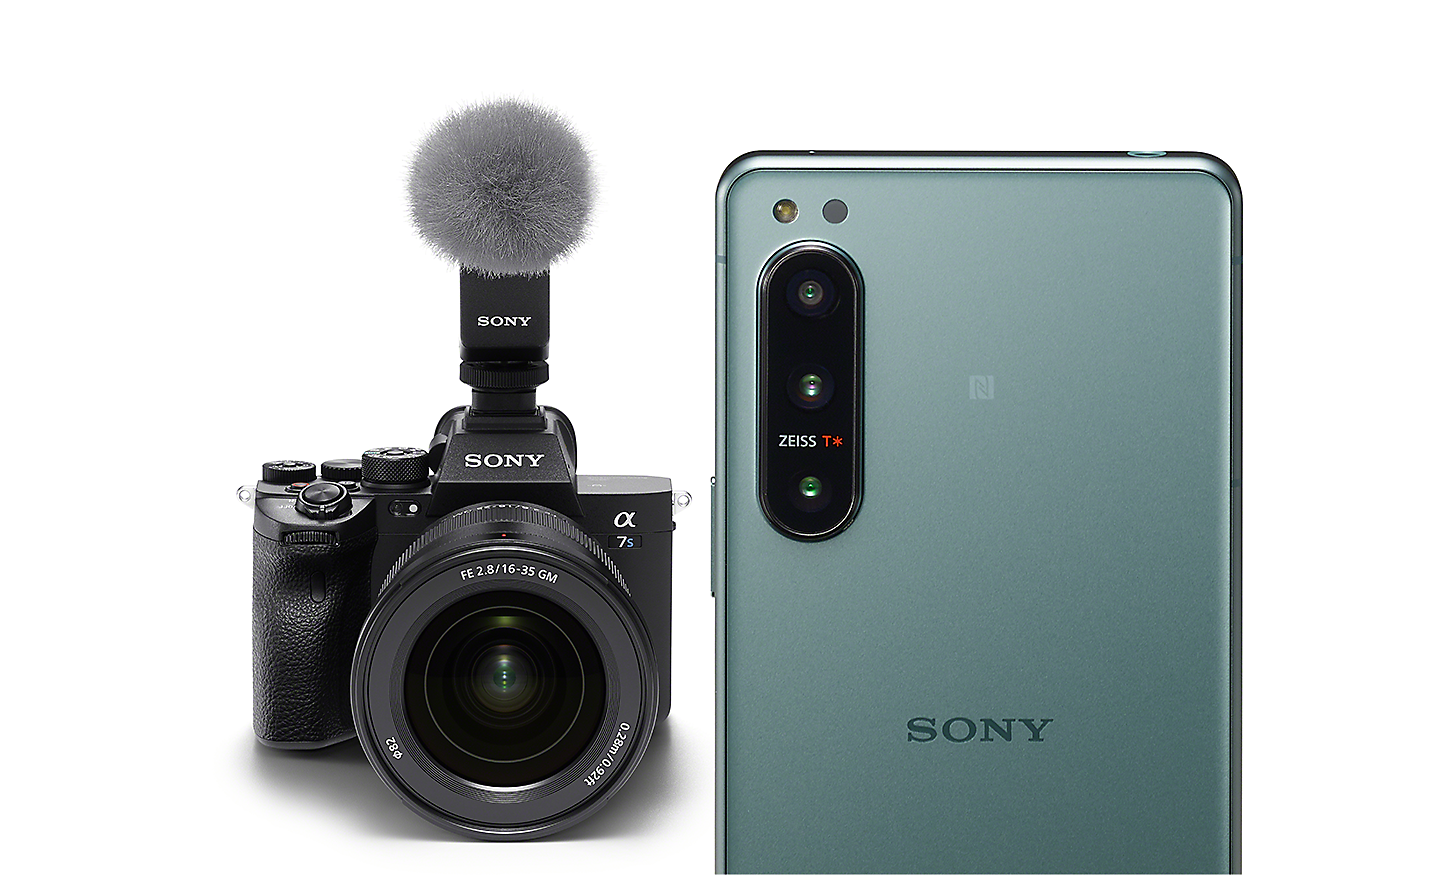 Xperia 5 IV in the foreground with Alpha series camera in the background